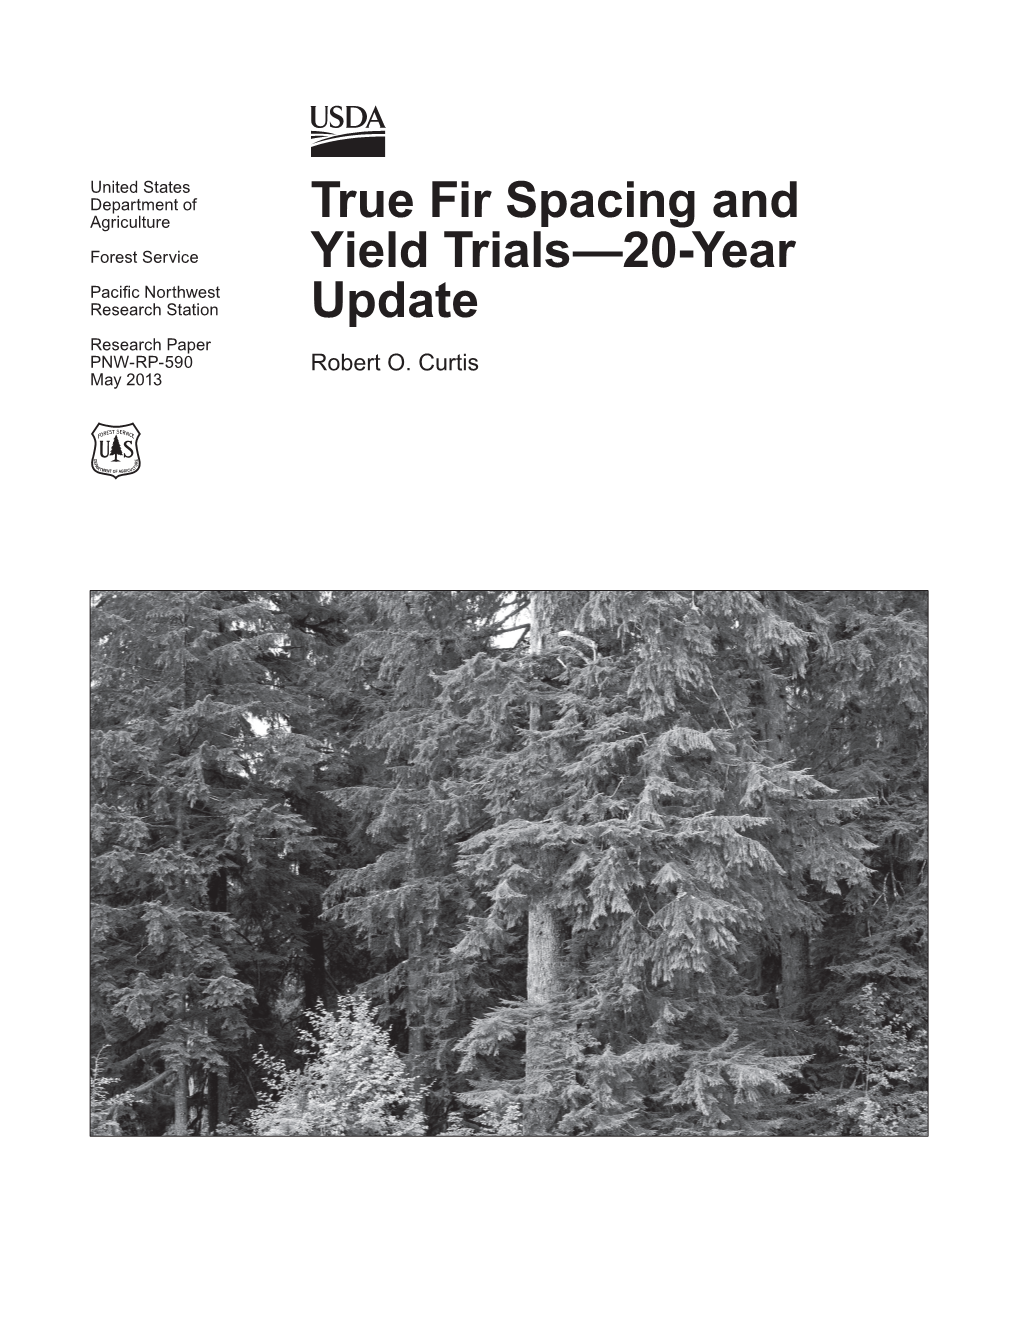 True Fir Spacing and Yield Trials—20-Year Update